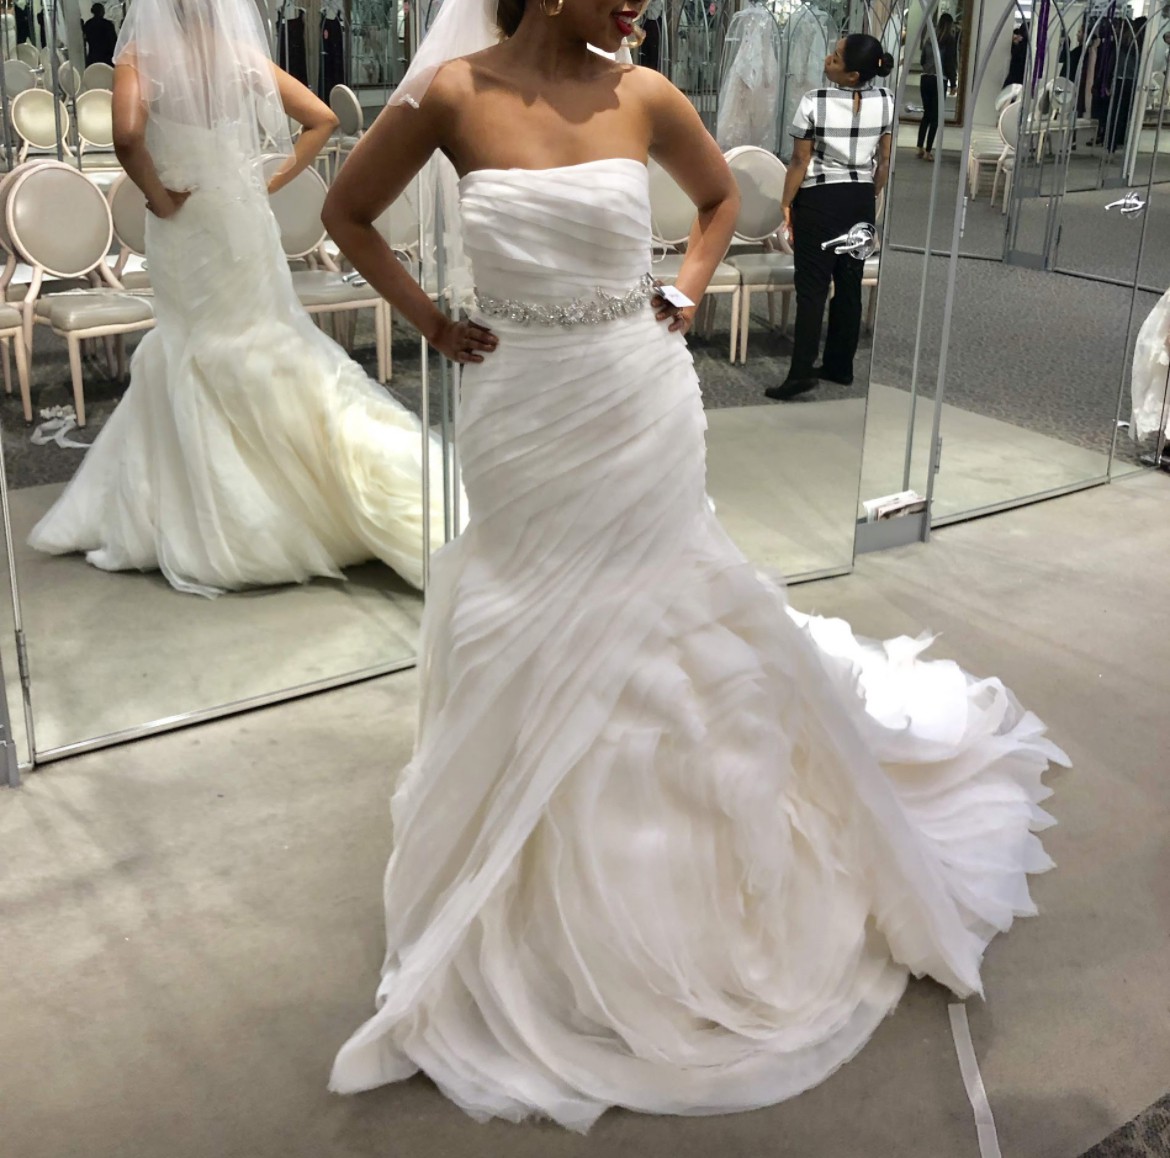 9 Vera Wang Gowns from Her New White Collection   Wedding dresses vera  wang, White wedding gowns, White wedding dresses